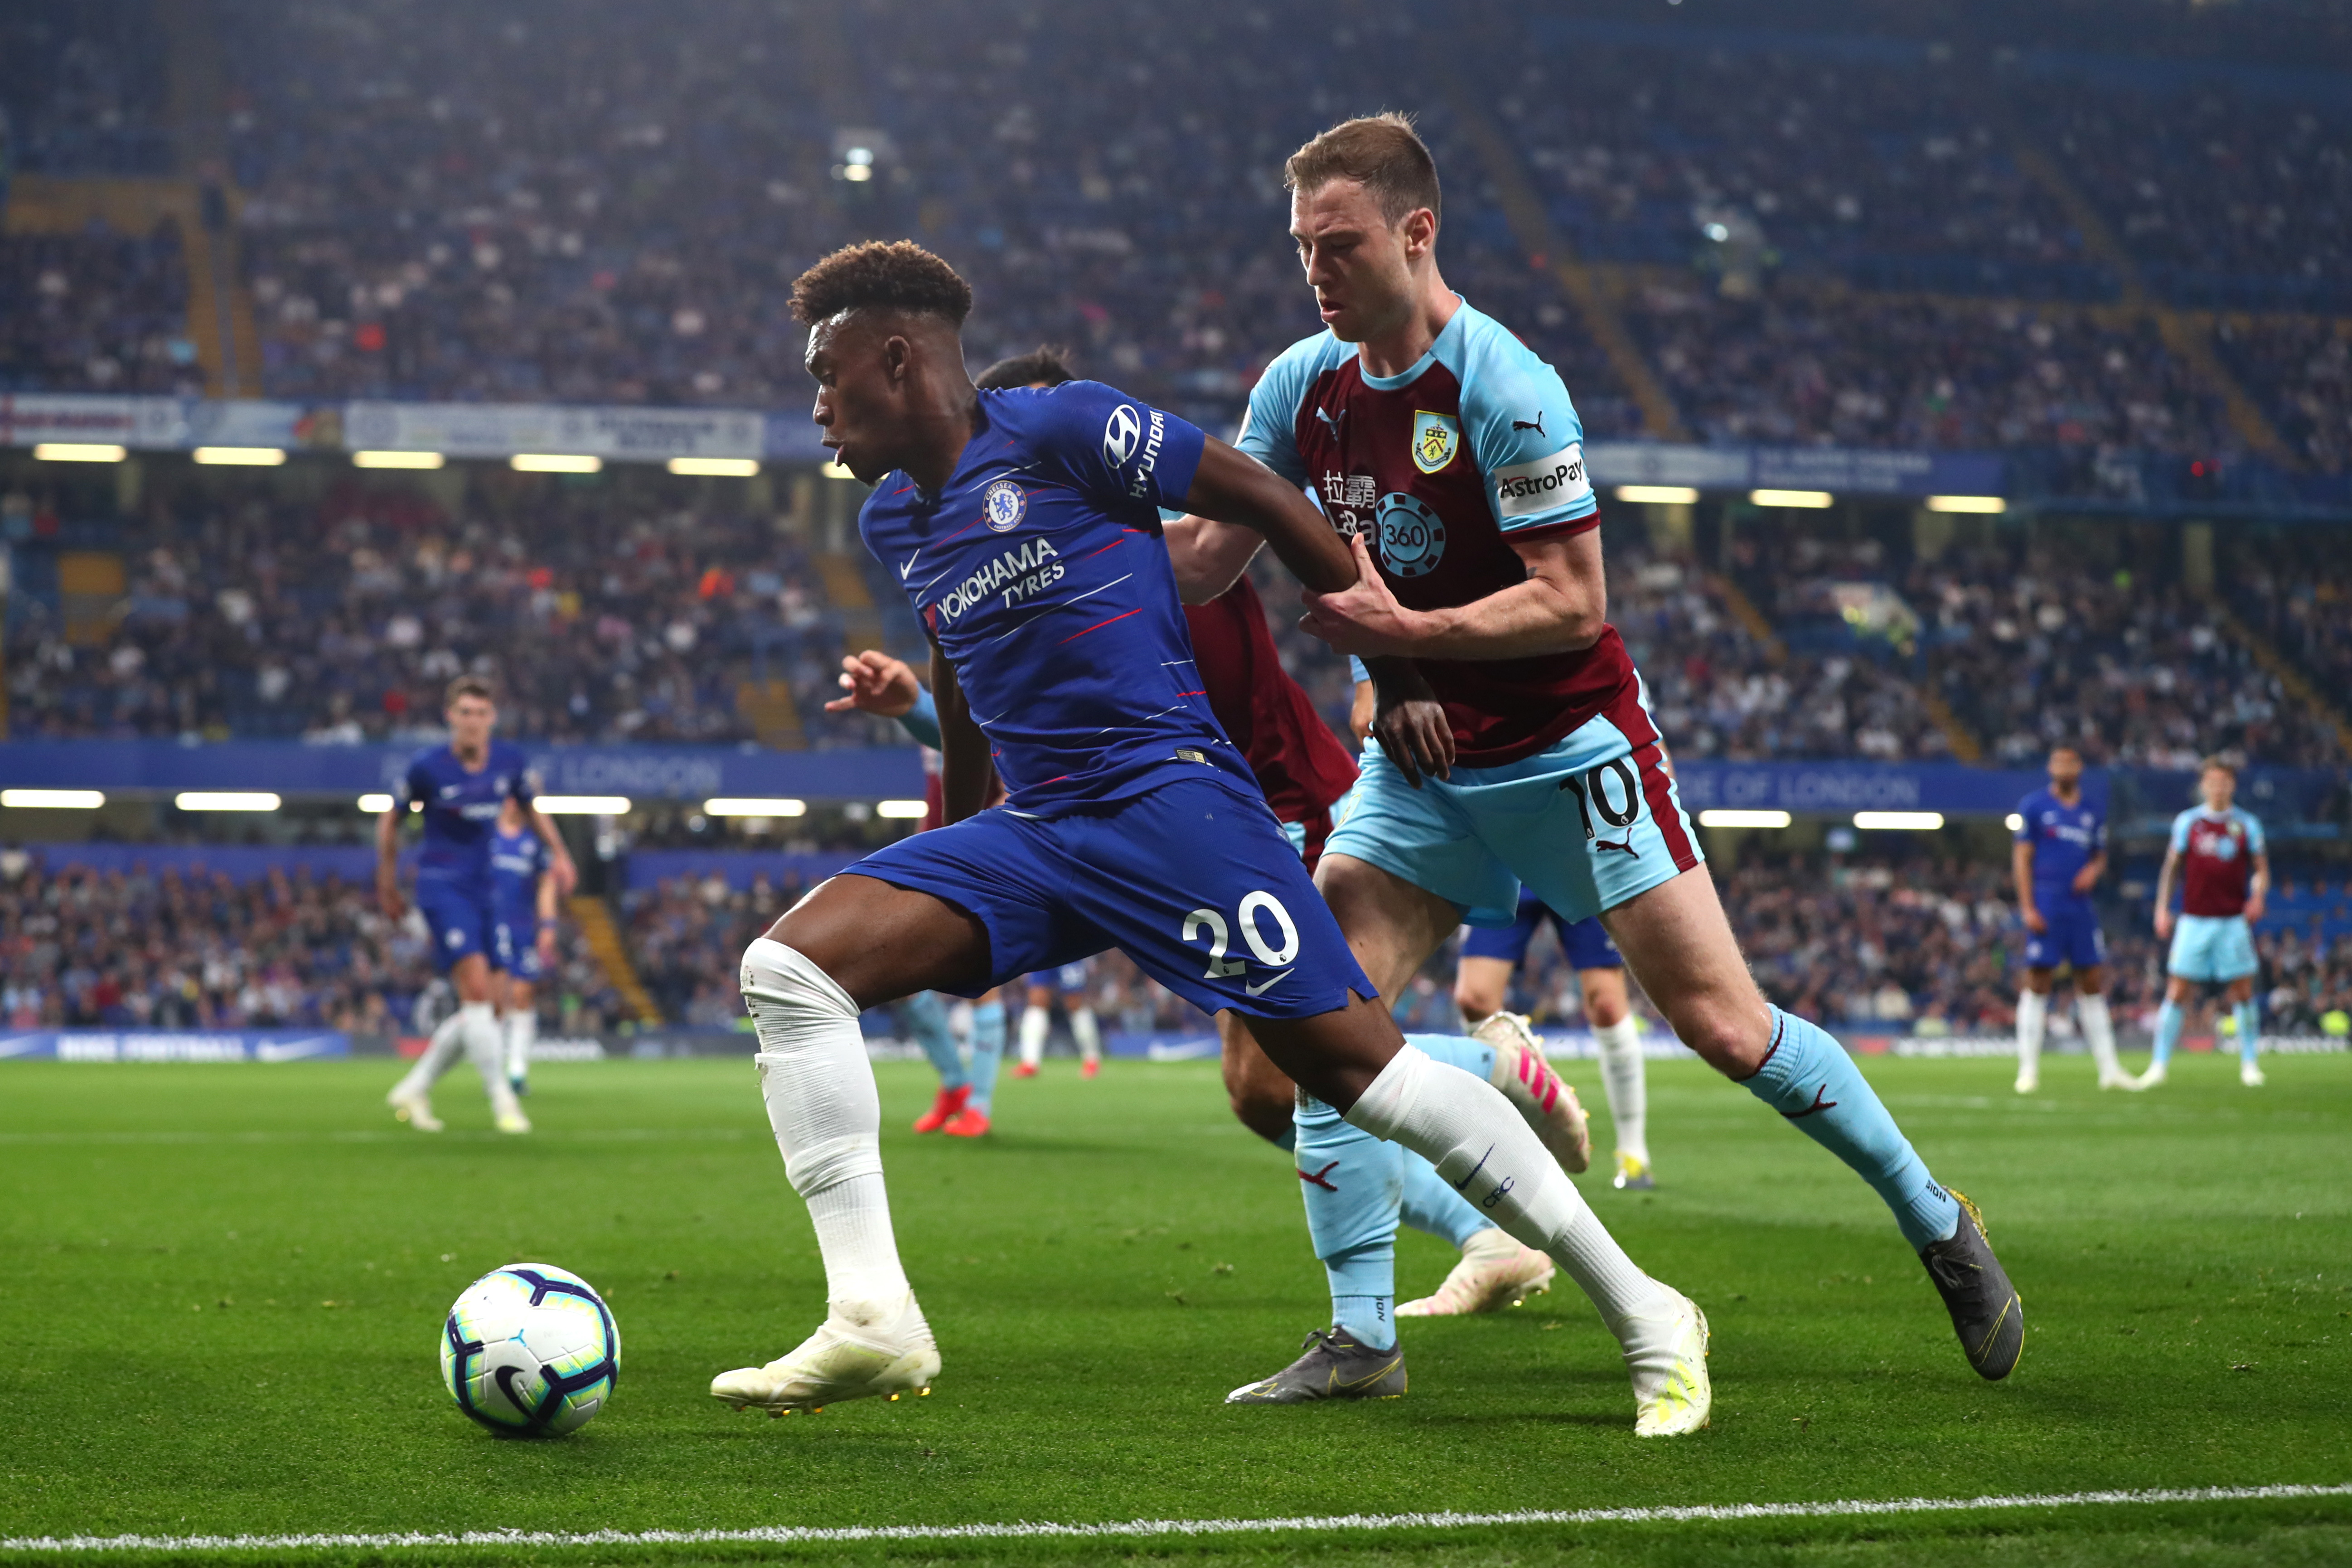 LONDON, ENGLAND - APRIL 22: Callum Hudson-Odoi of Chelsea holds off Ashley Barnes of Burnley during the Premier League match between Chelsea FC and Burnley FC at Stamford Bridge on April 22, 2019 in London, United Kingdom. (Photo by Clive Rose/Getty Images)